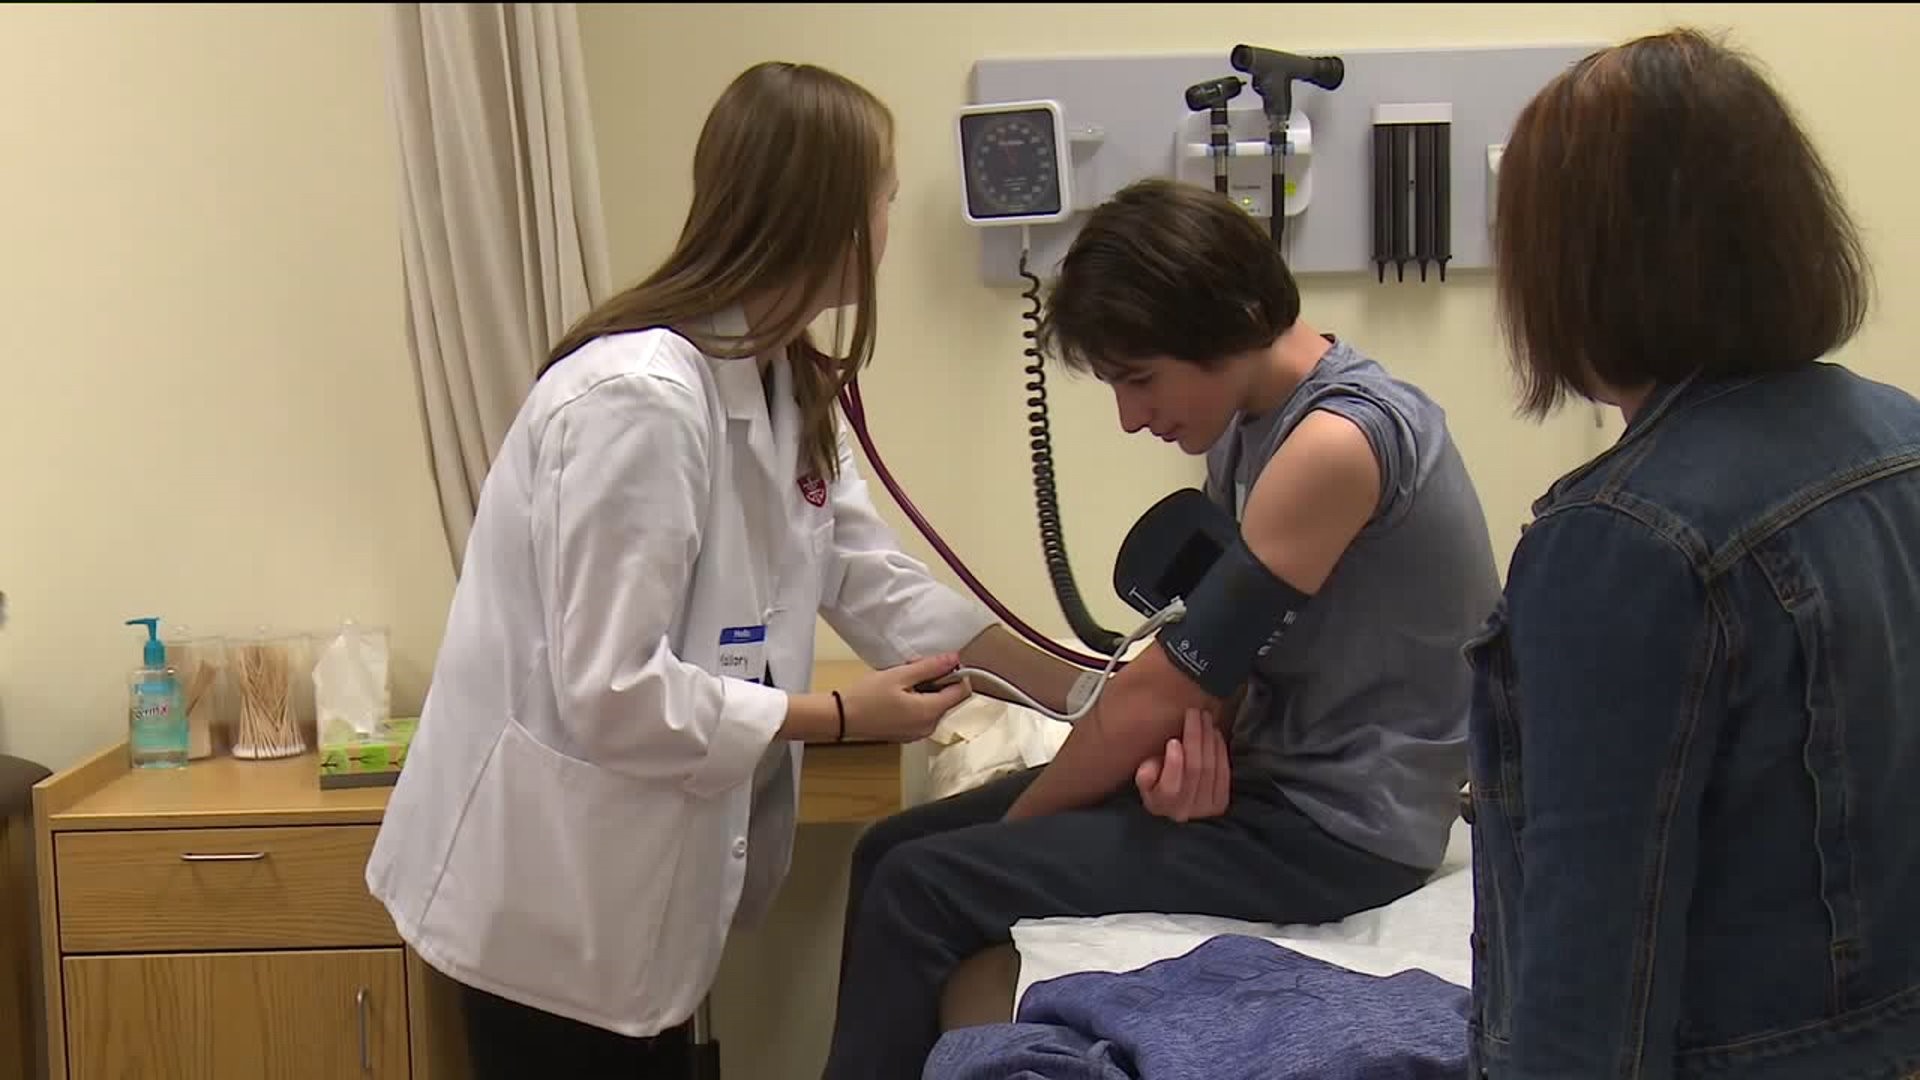 Free Heart Screenings for Students